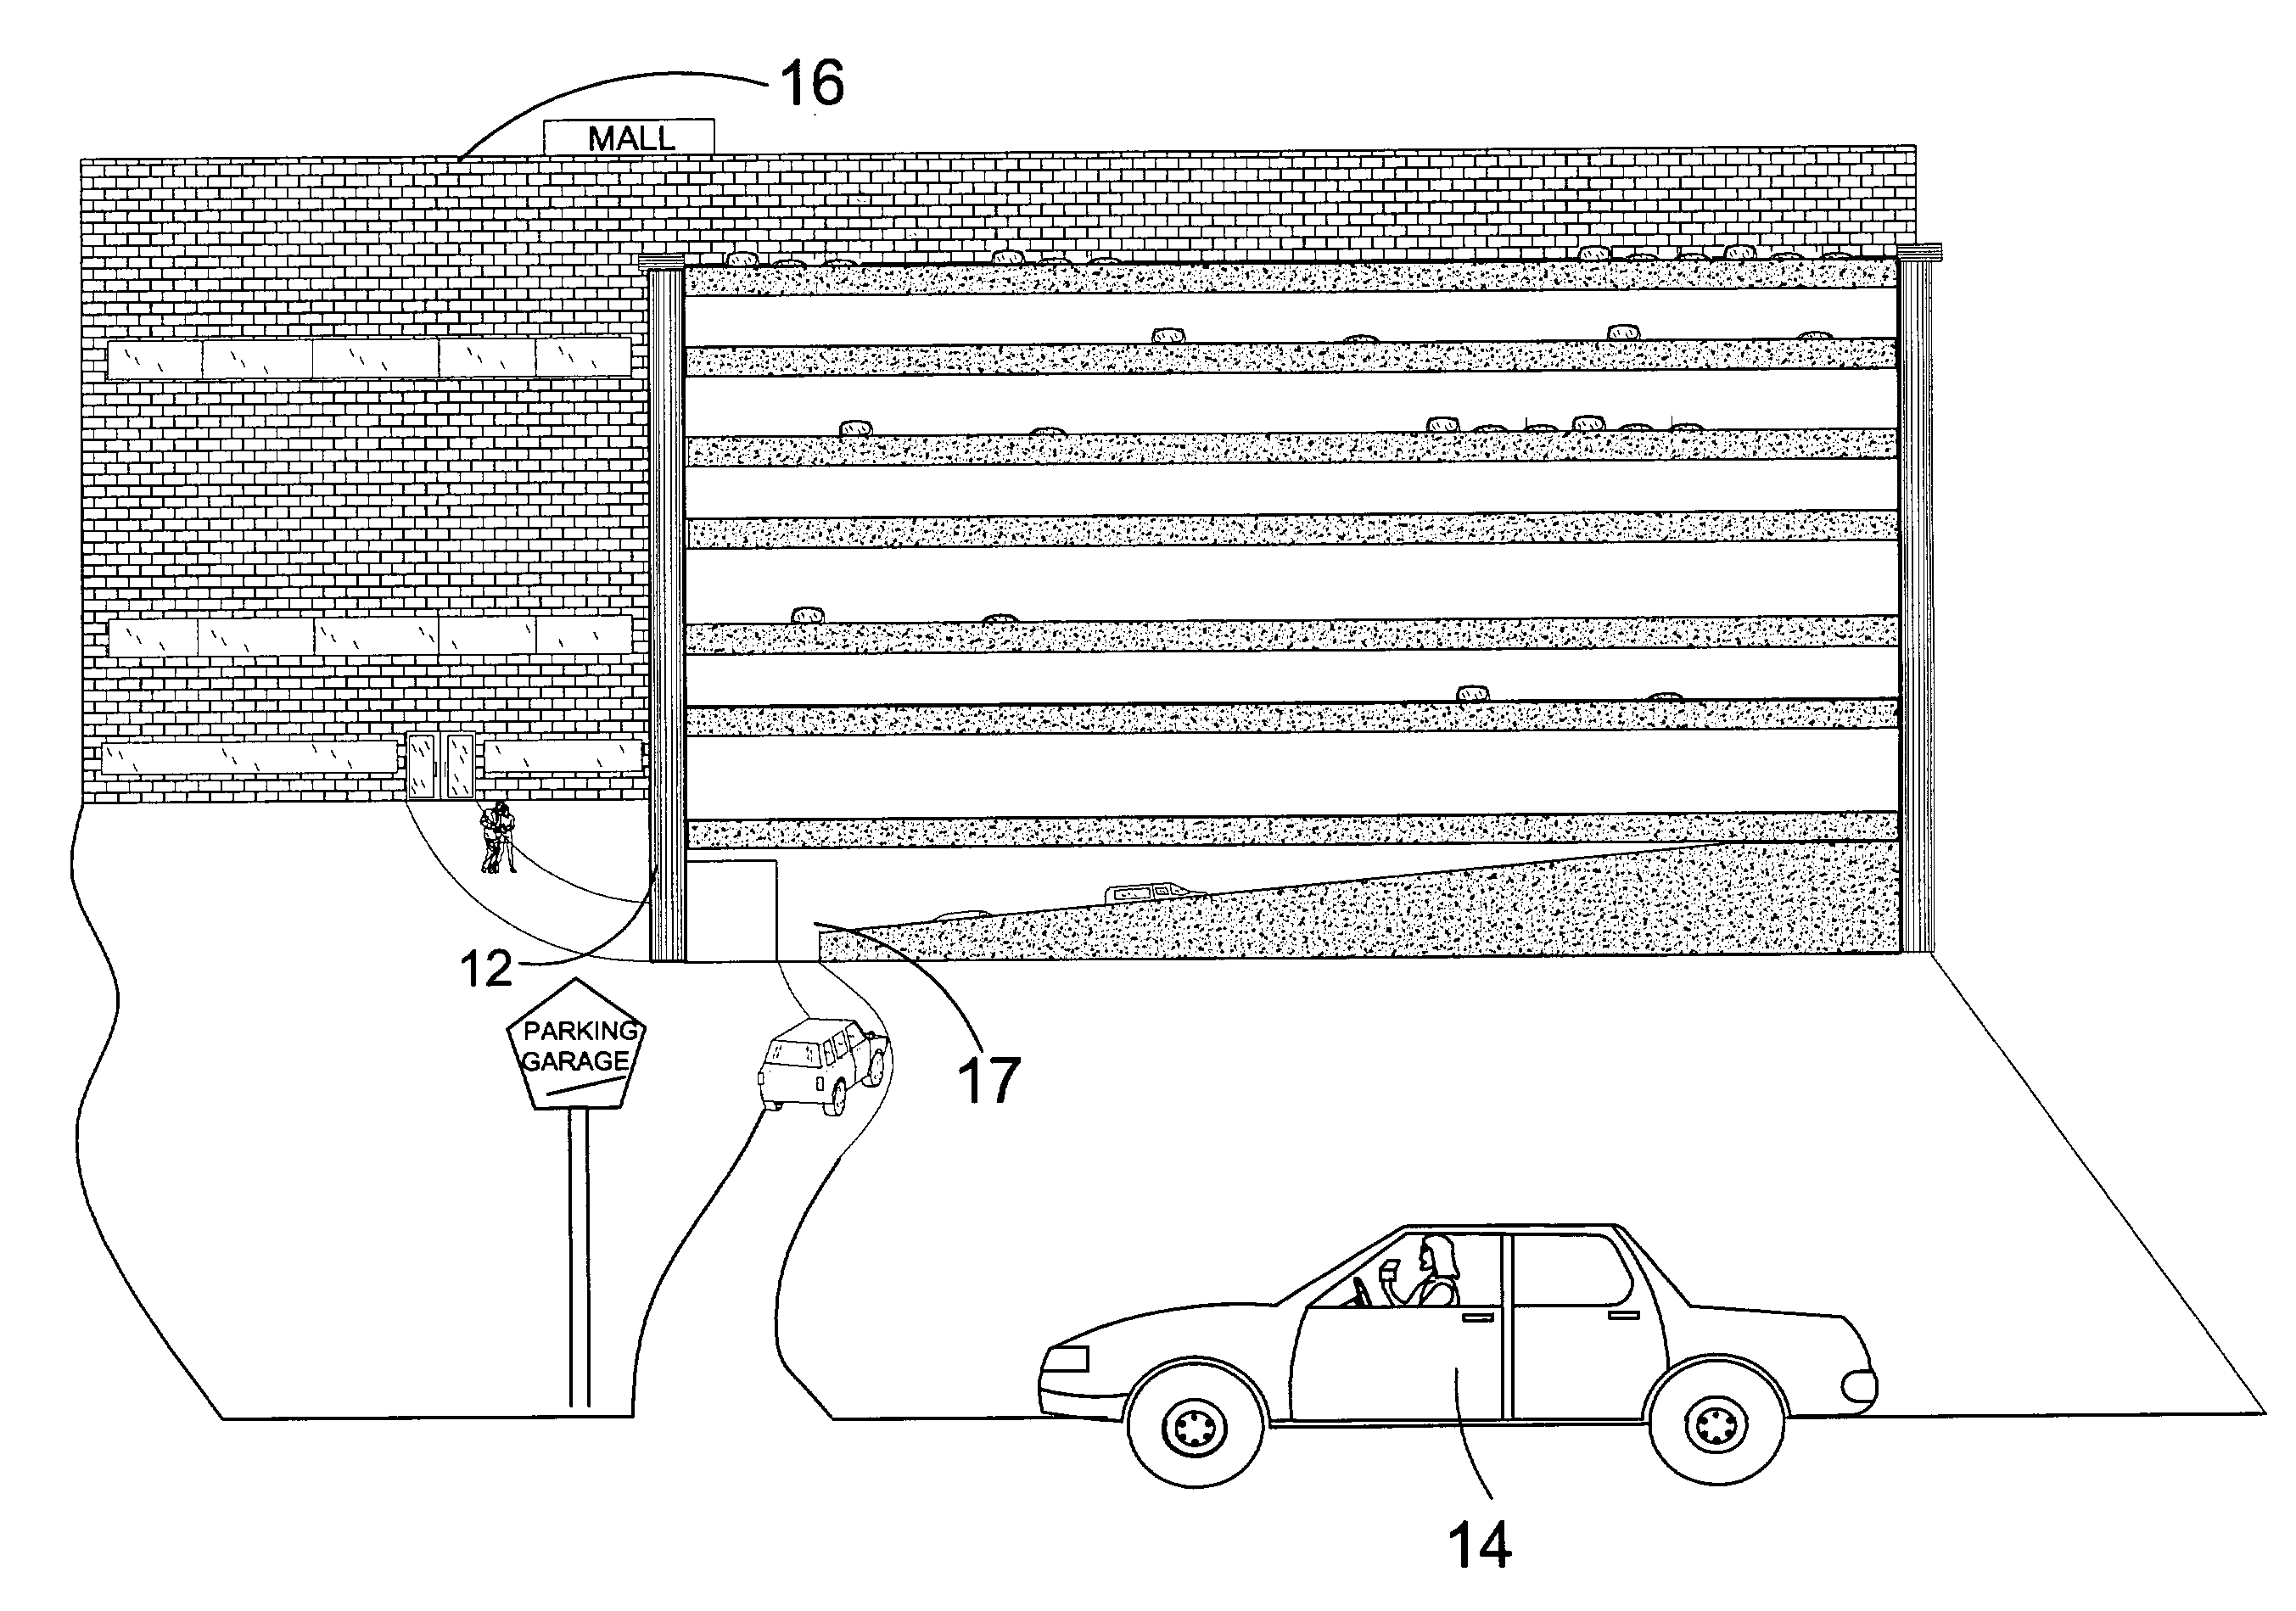 Parking guidance method and system